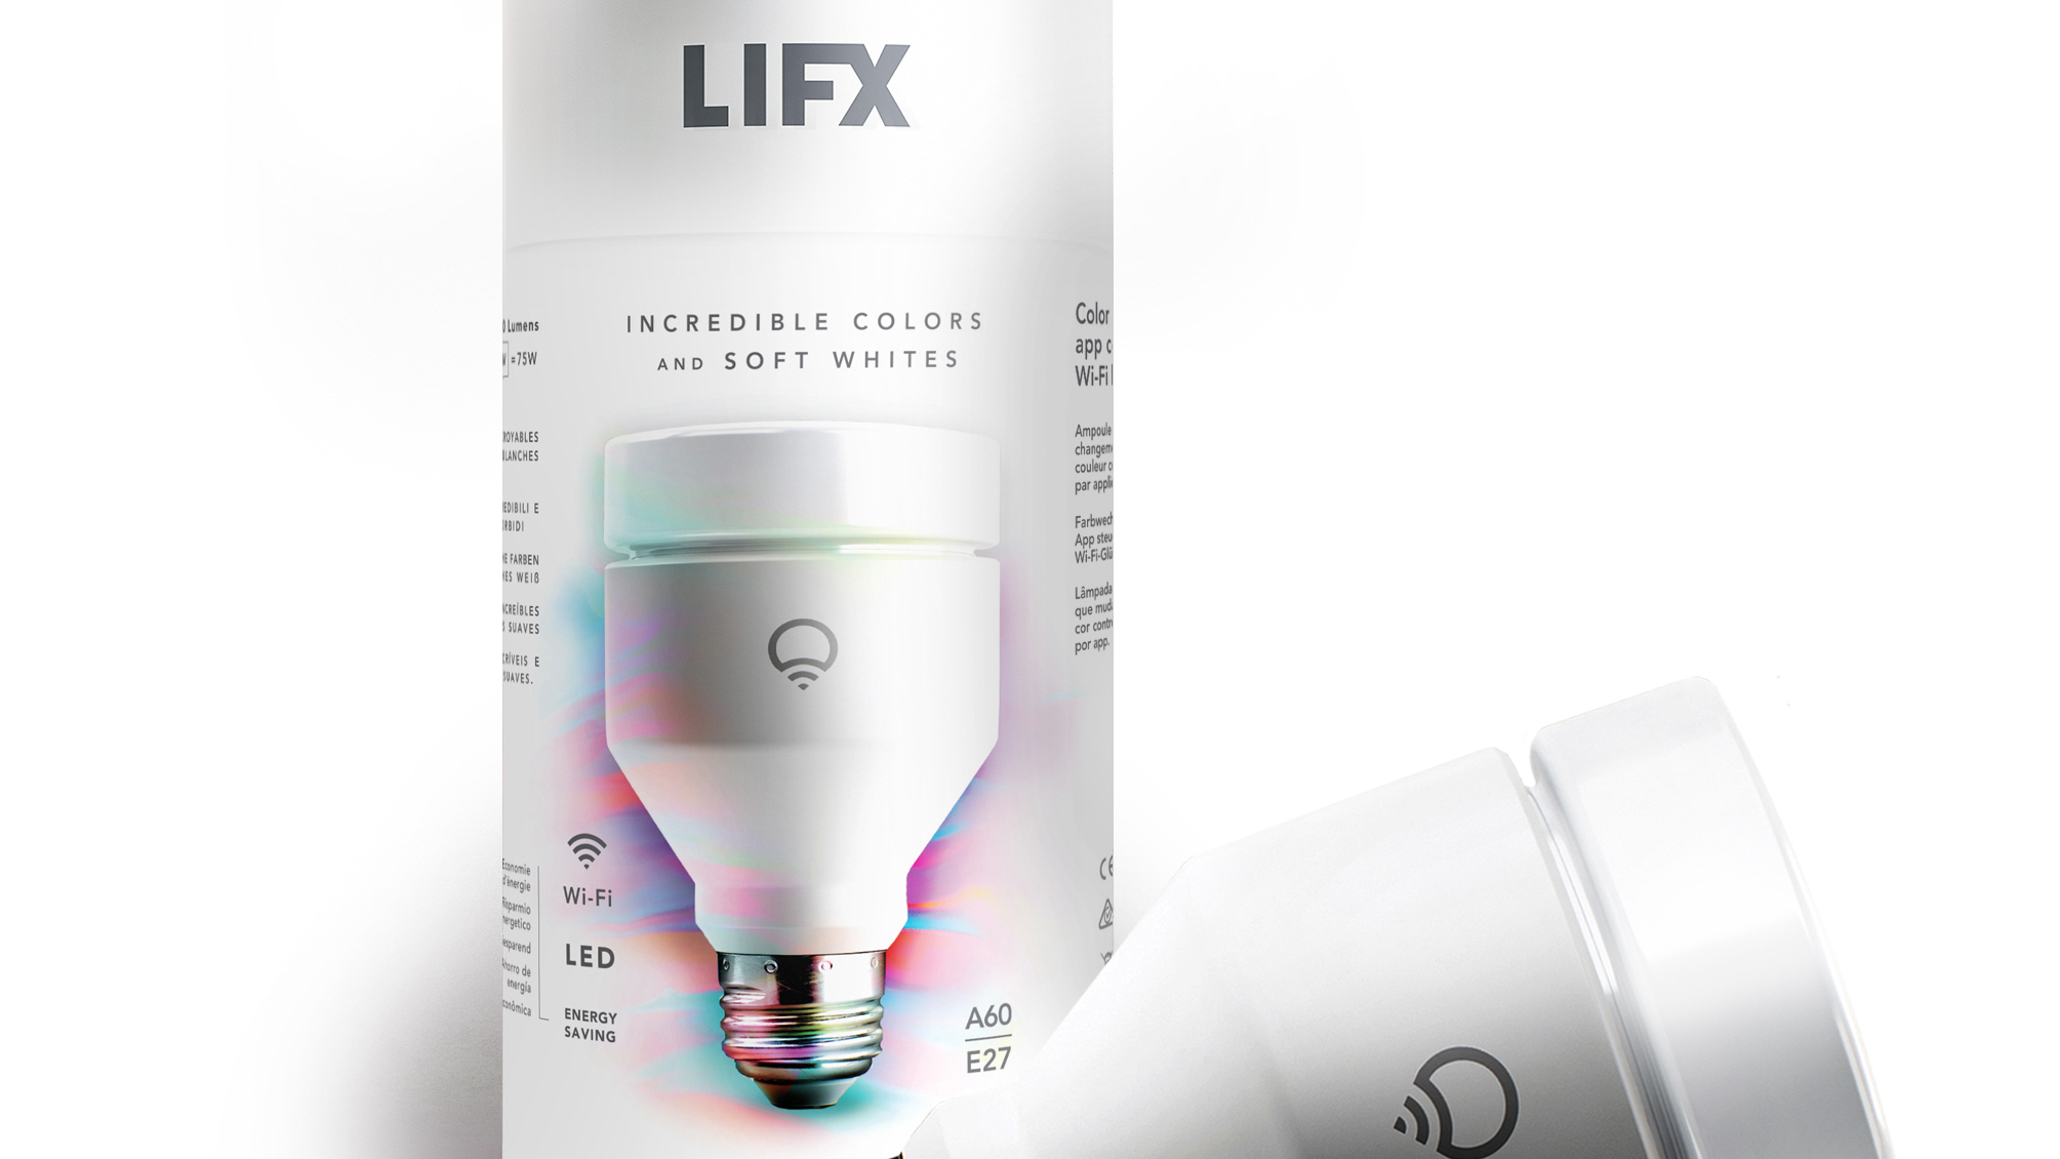 LIFX smart bulbs are among the choices for lamps that work with the Nest ecosystem. Image: LIFX.